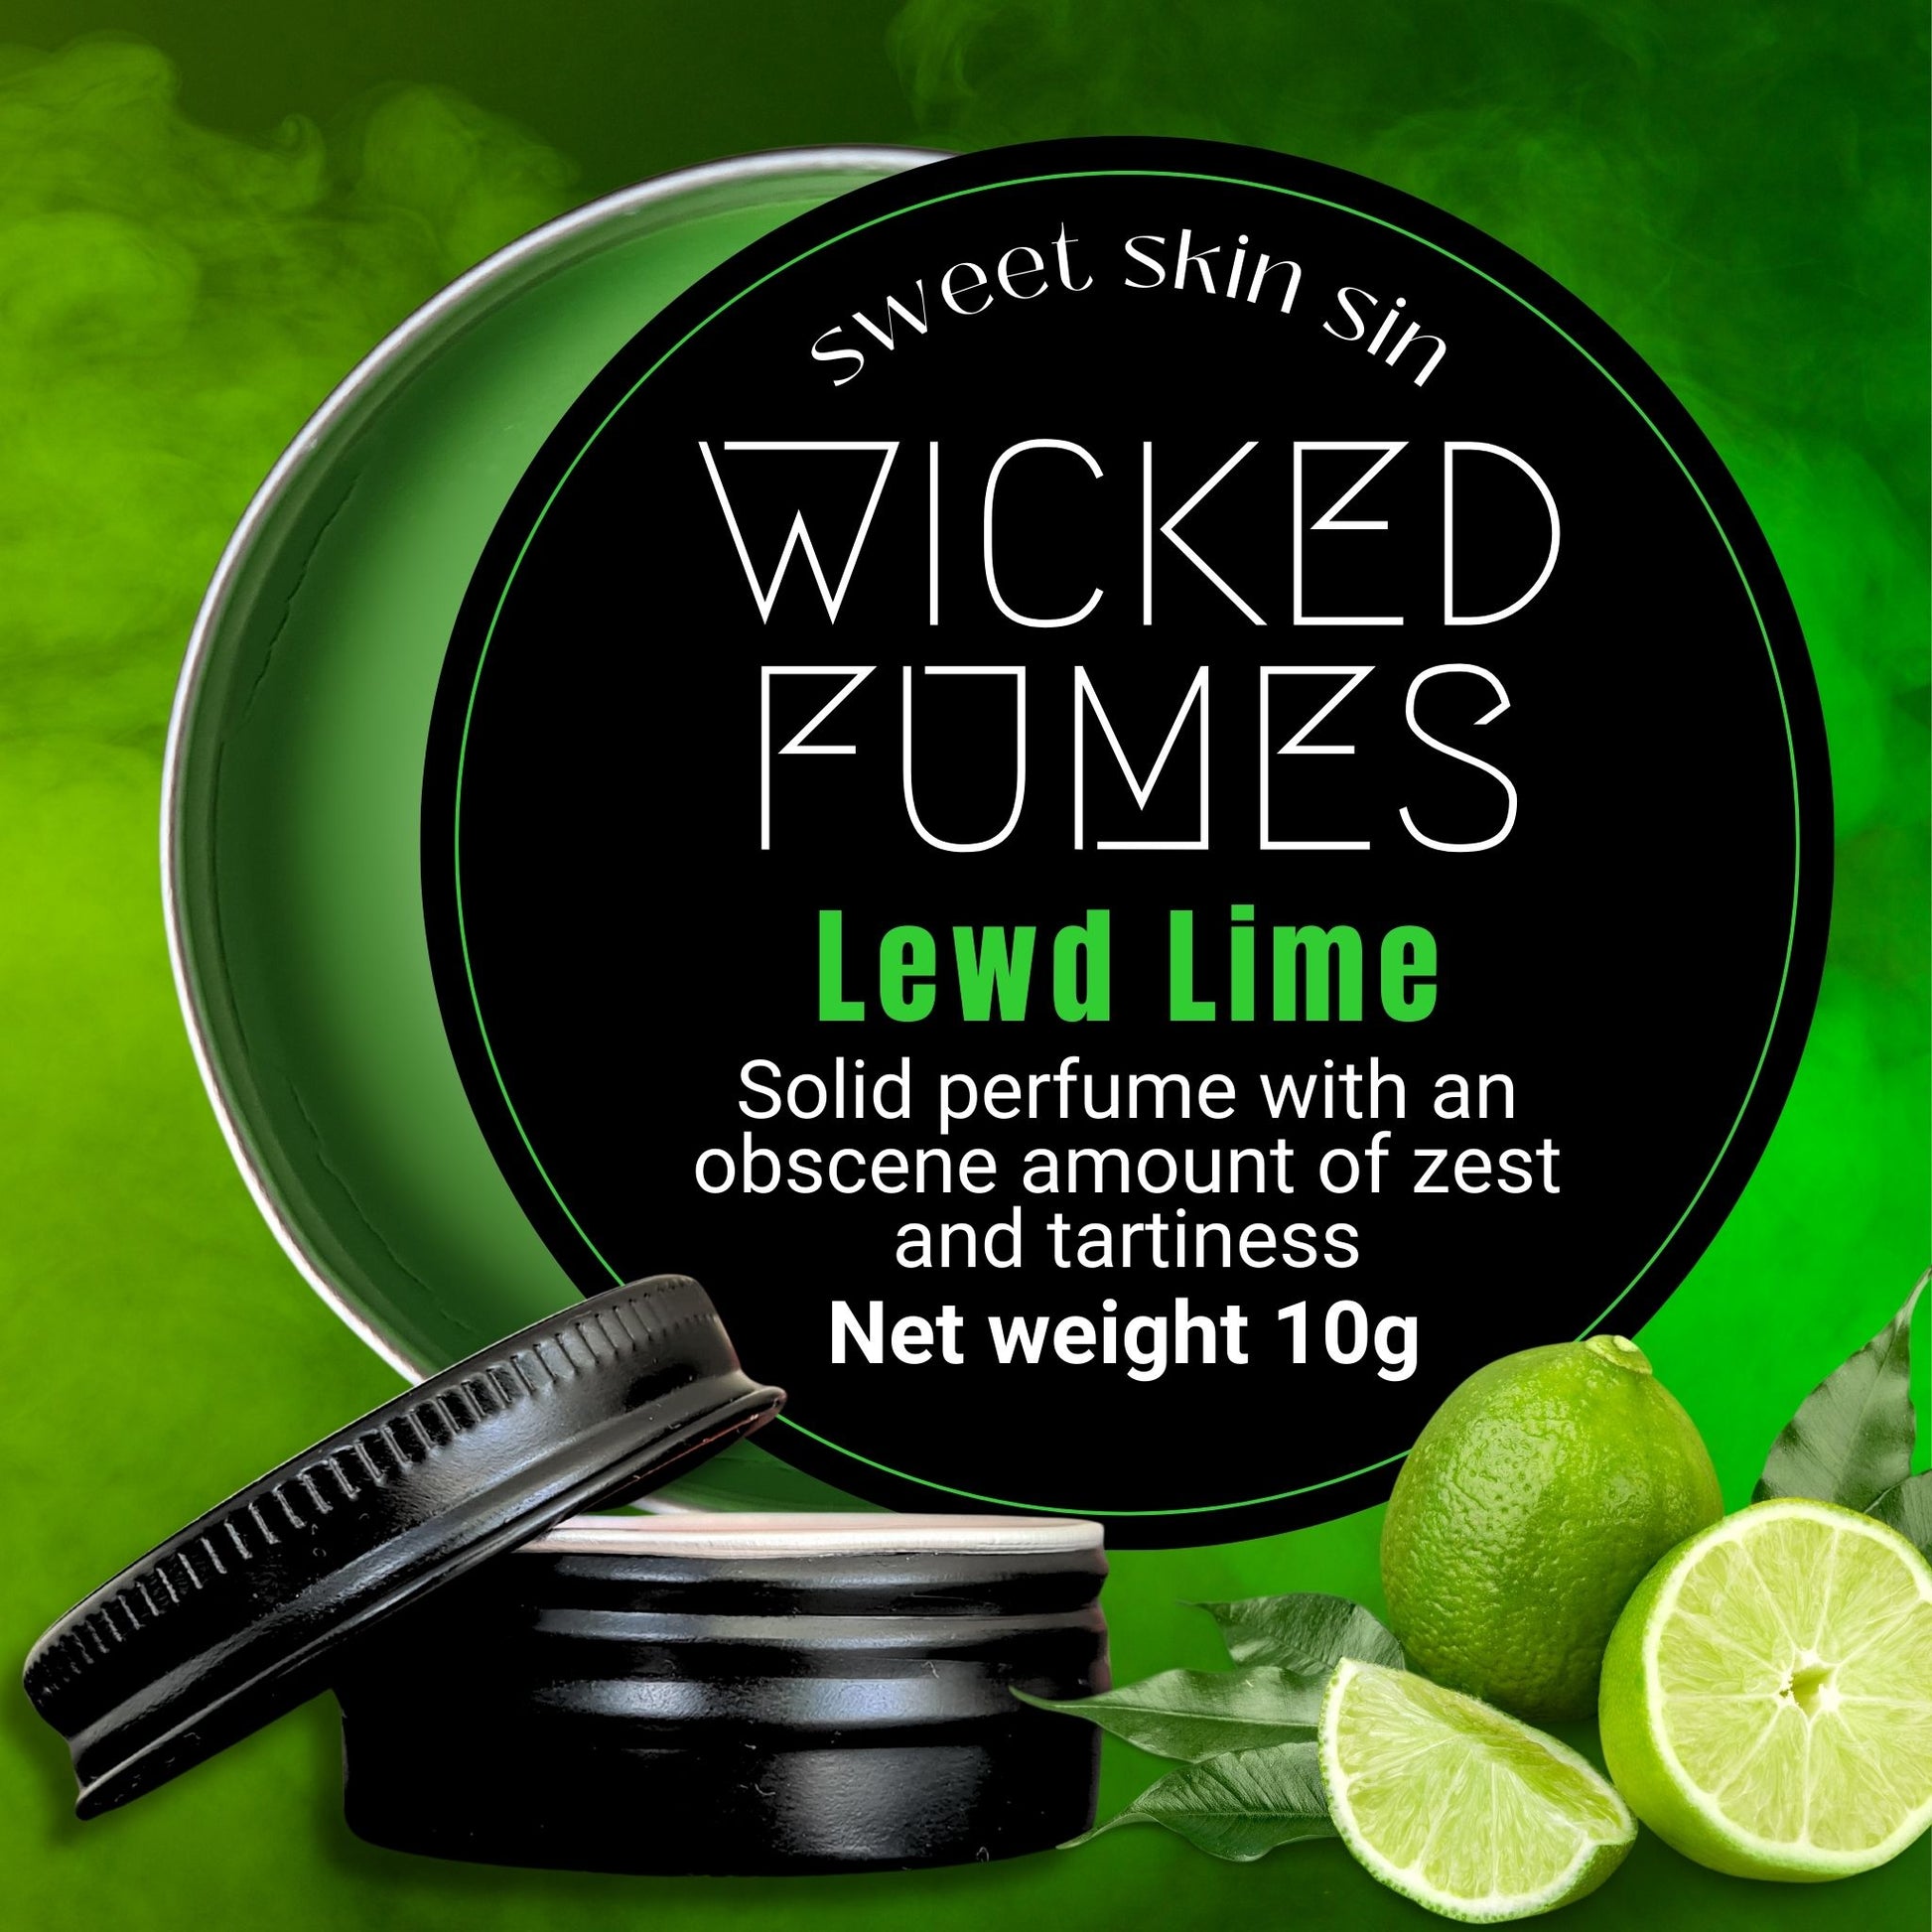 Image of a solid perfume Lewd Lime from Wicked Fumes in a small black round jar against a green smoke background with some limes pictured